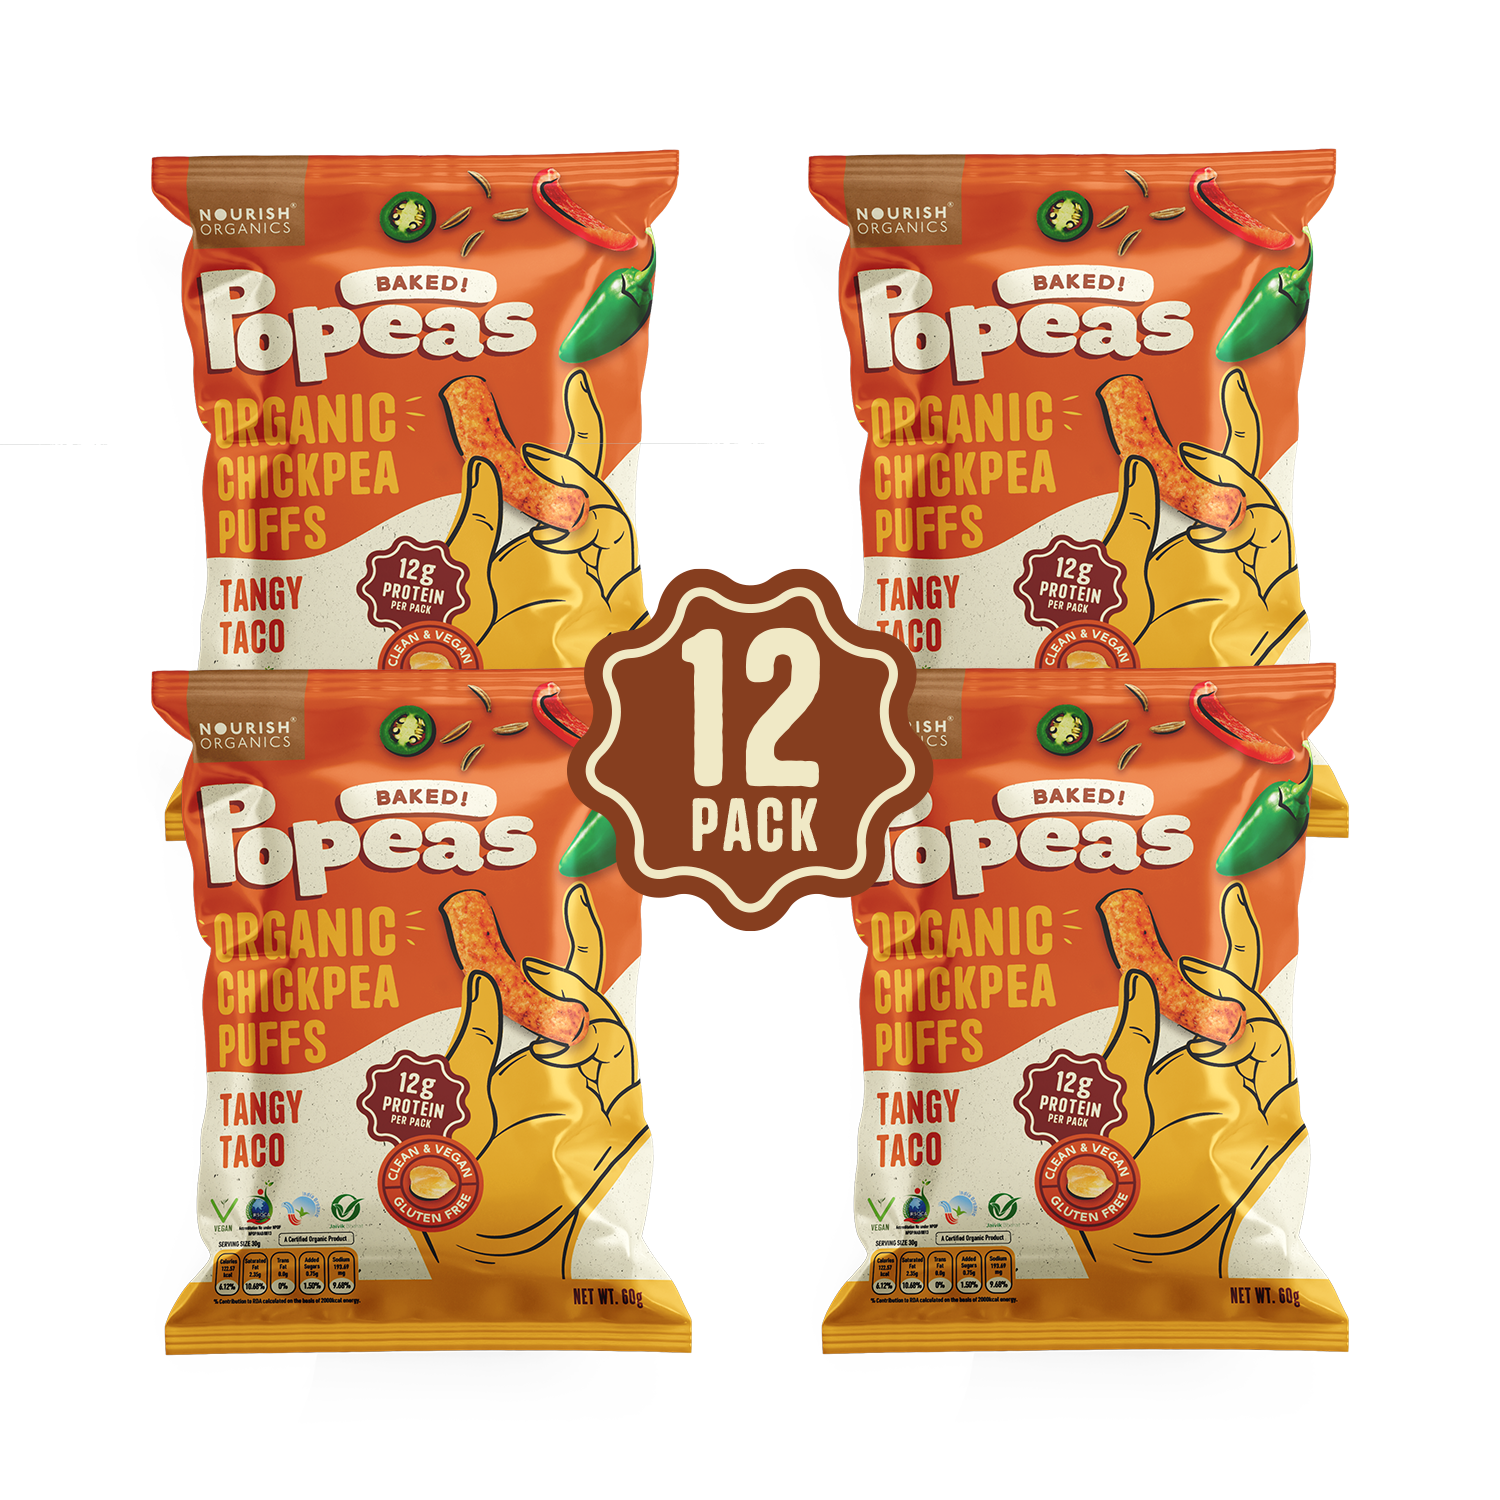 Popeas Protein Puffs - Tangy Taco (Pack of 12)